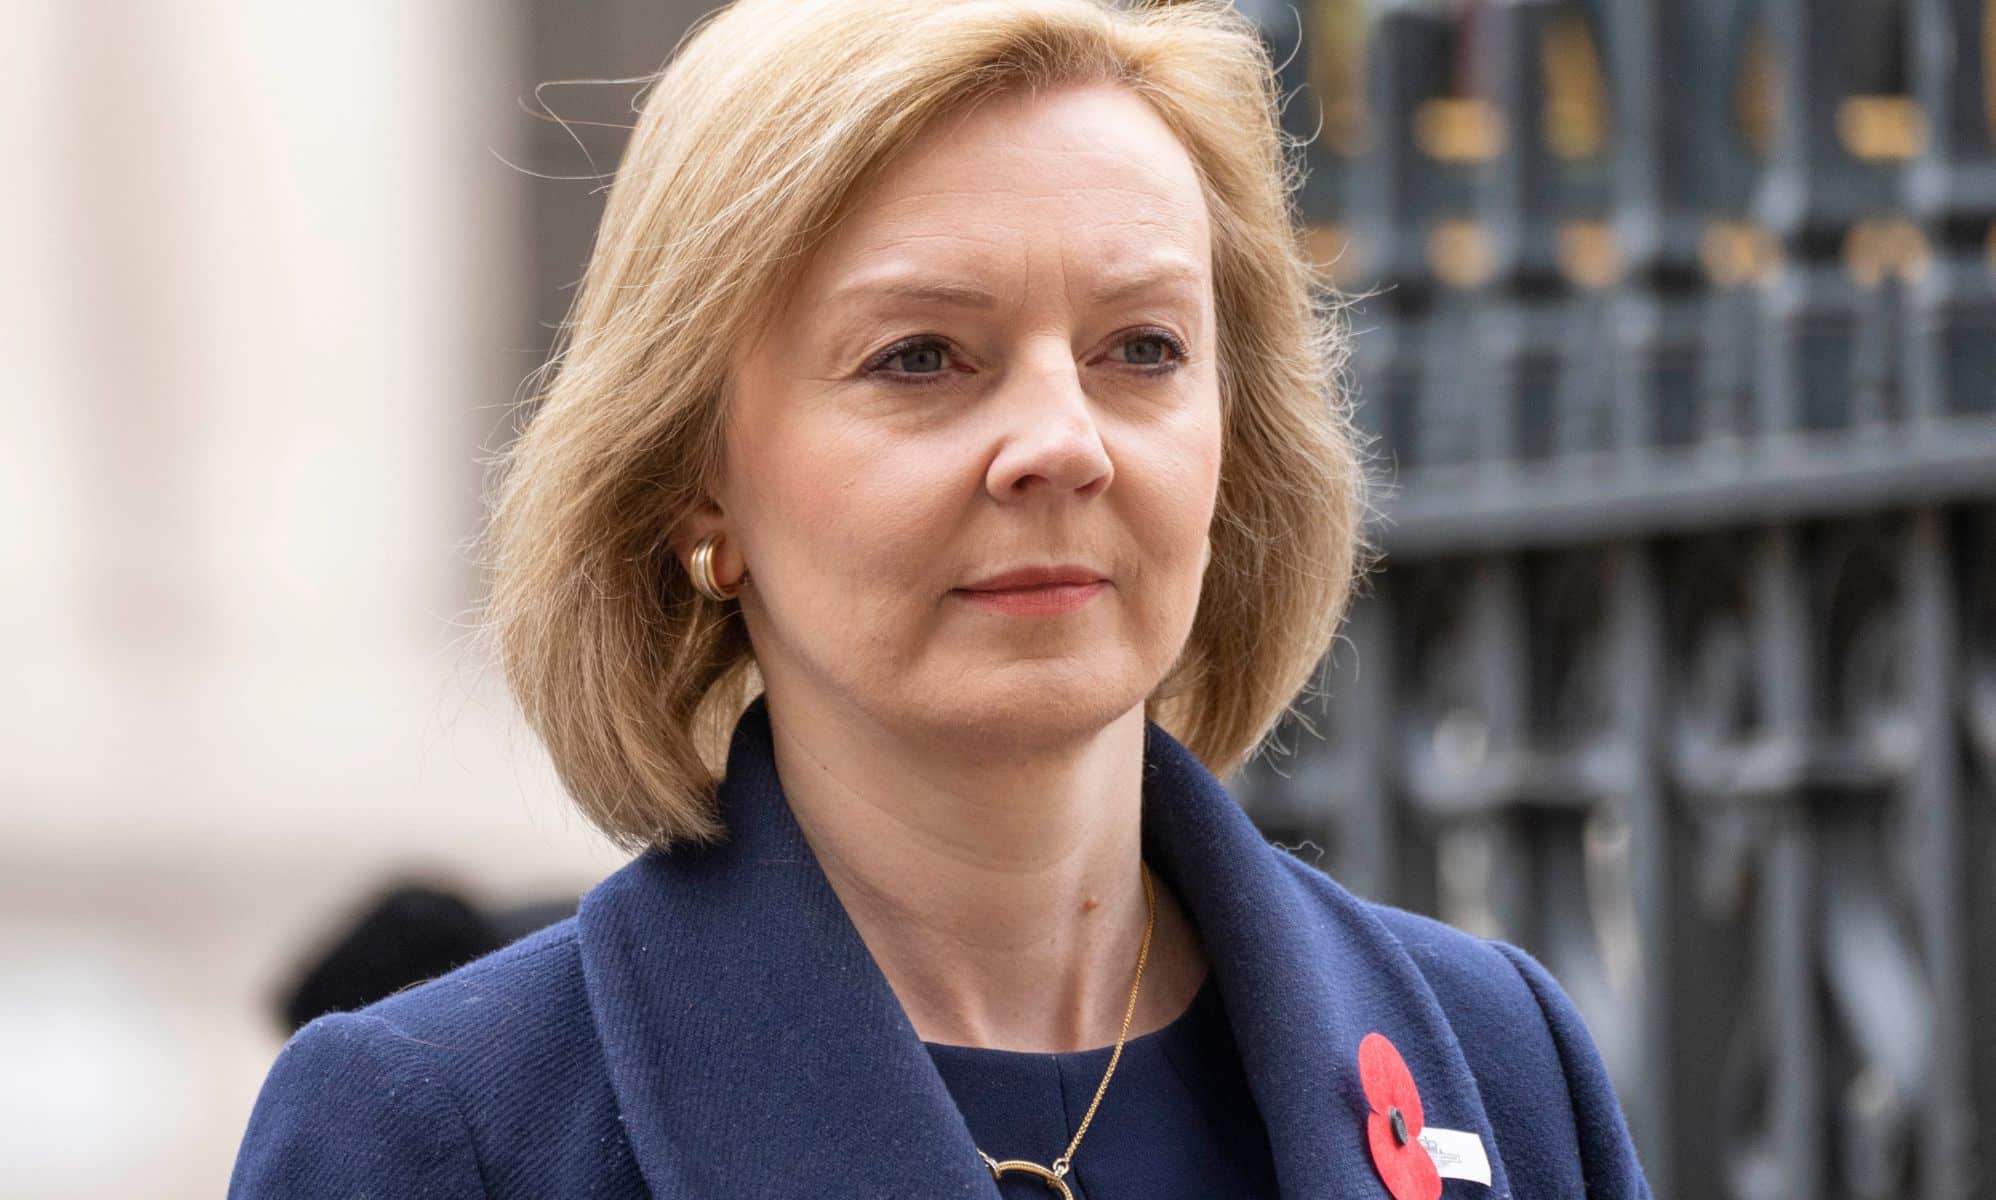 Liz Truss wears a dark blue jacket with a red poppy as she stands outside